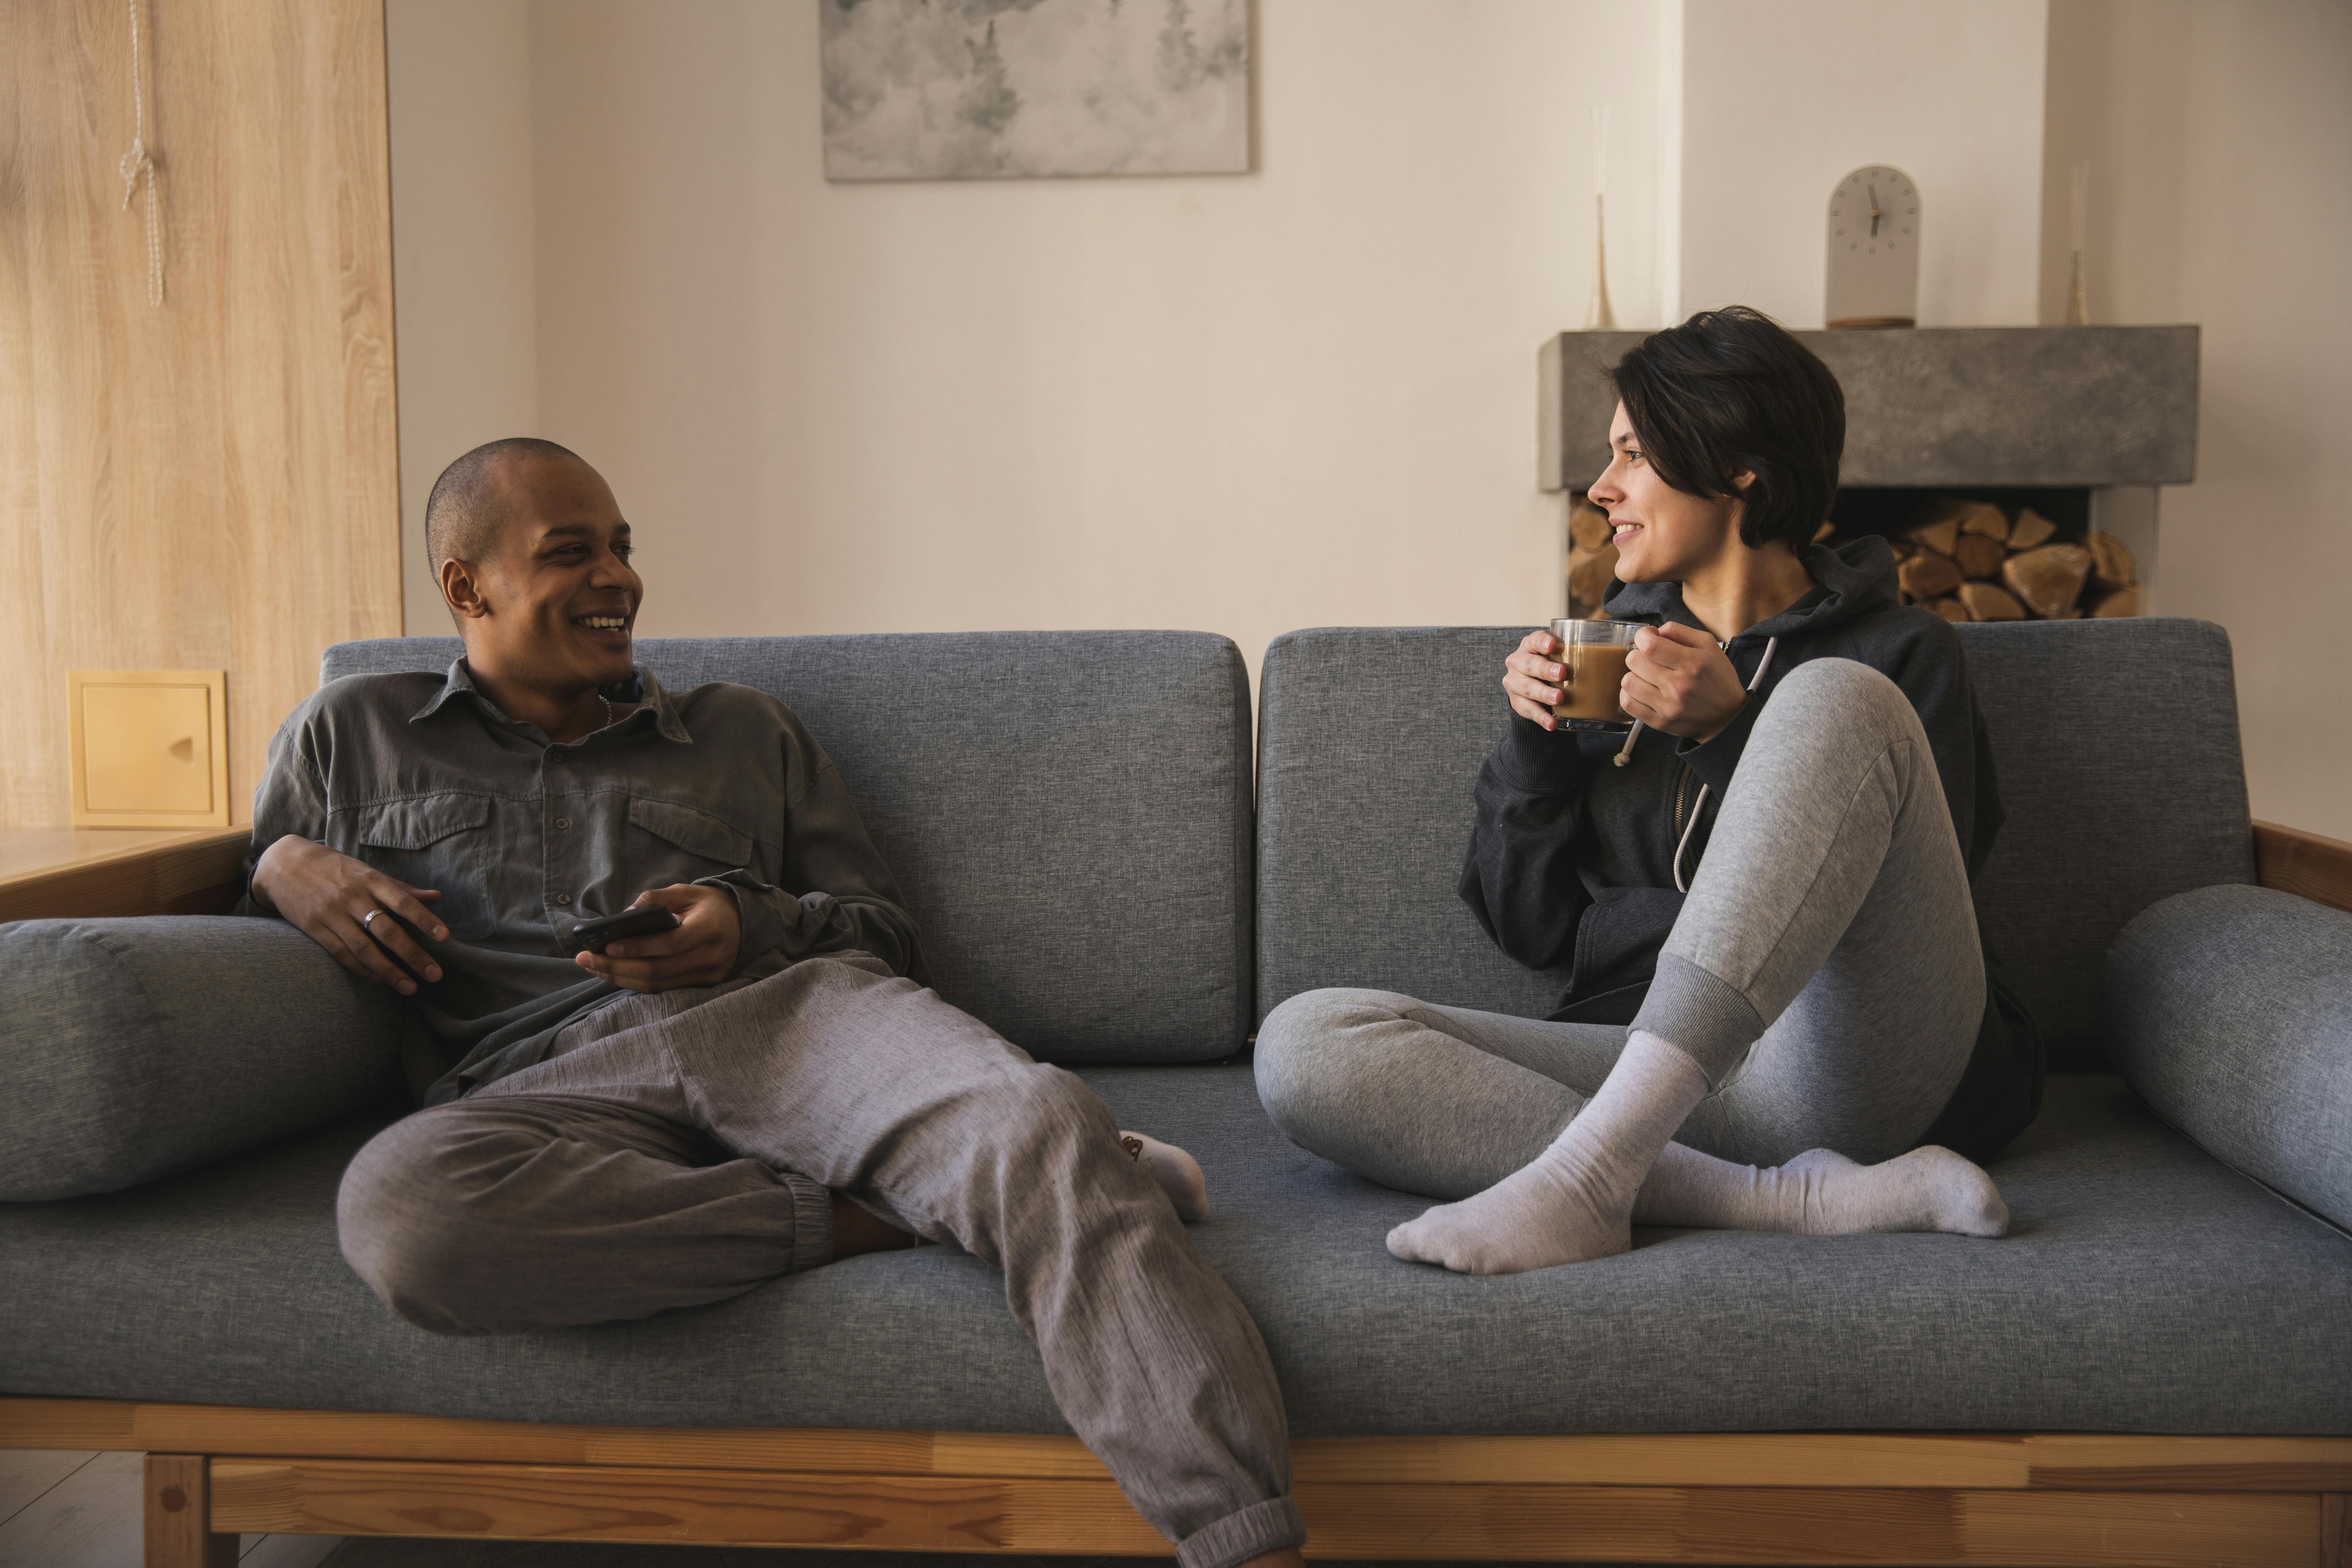 A couple smiling while talking, seated on a couch | Source: Pexels